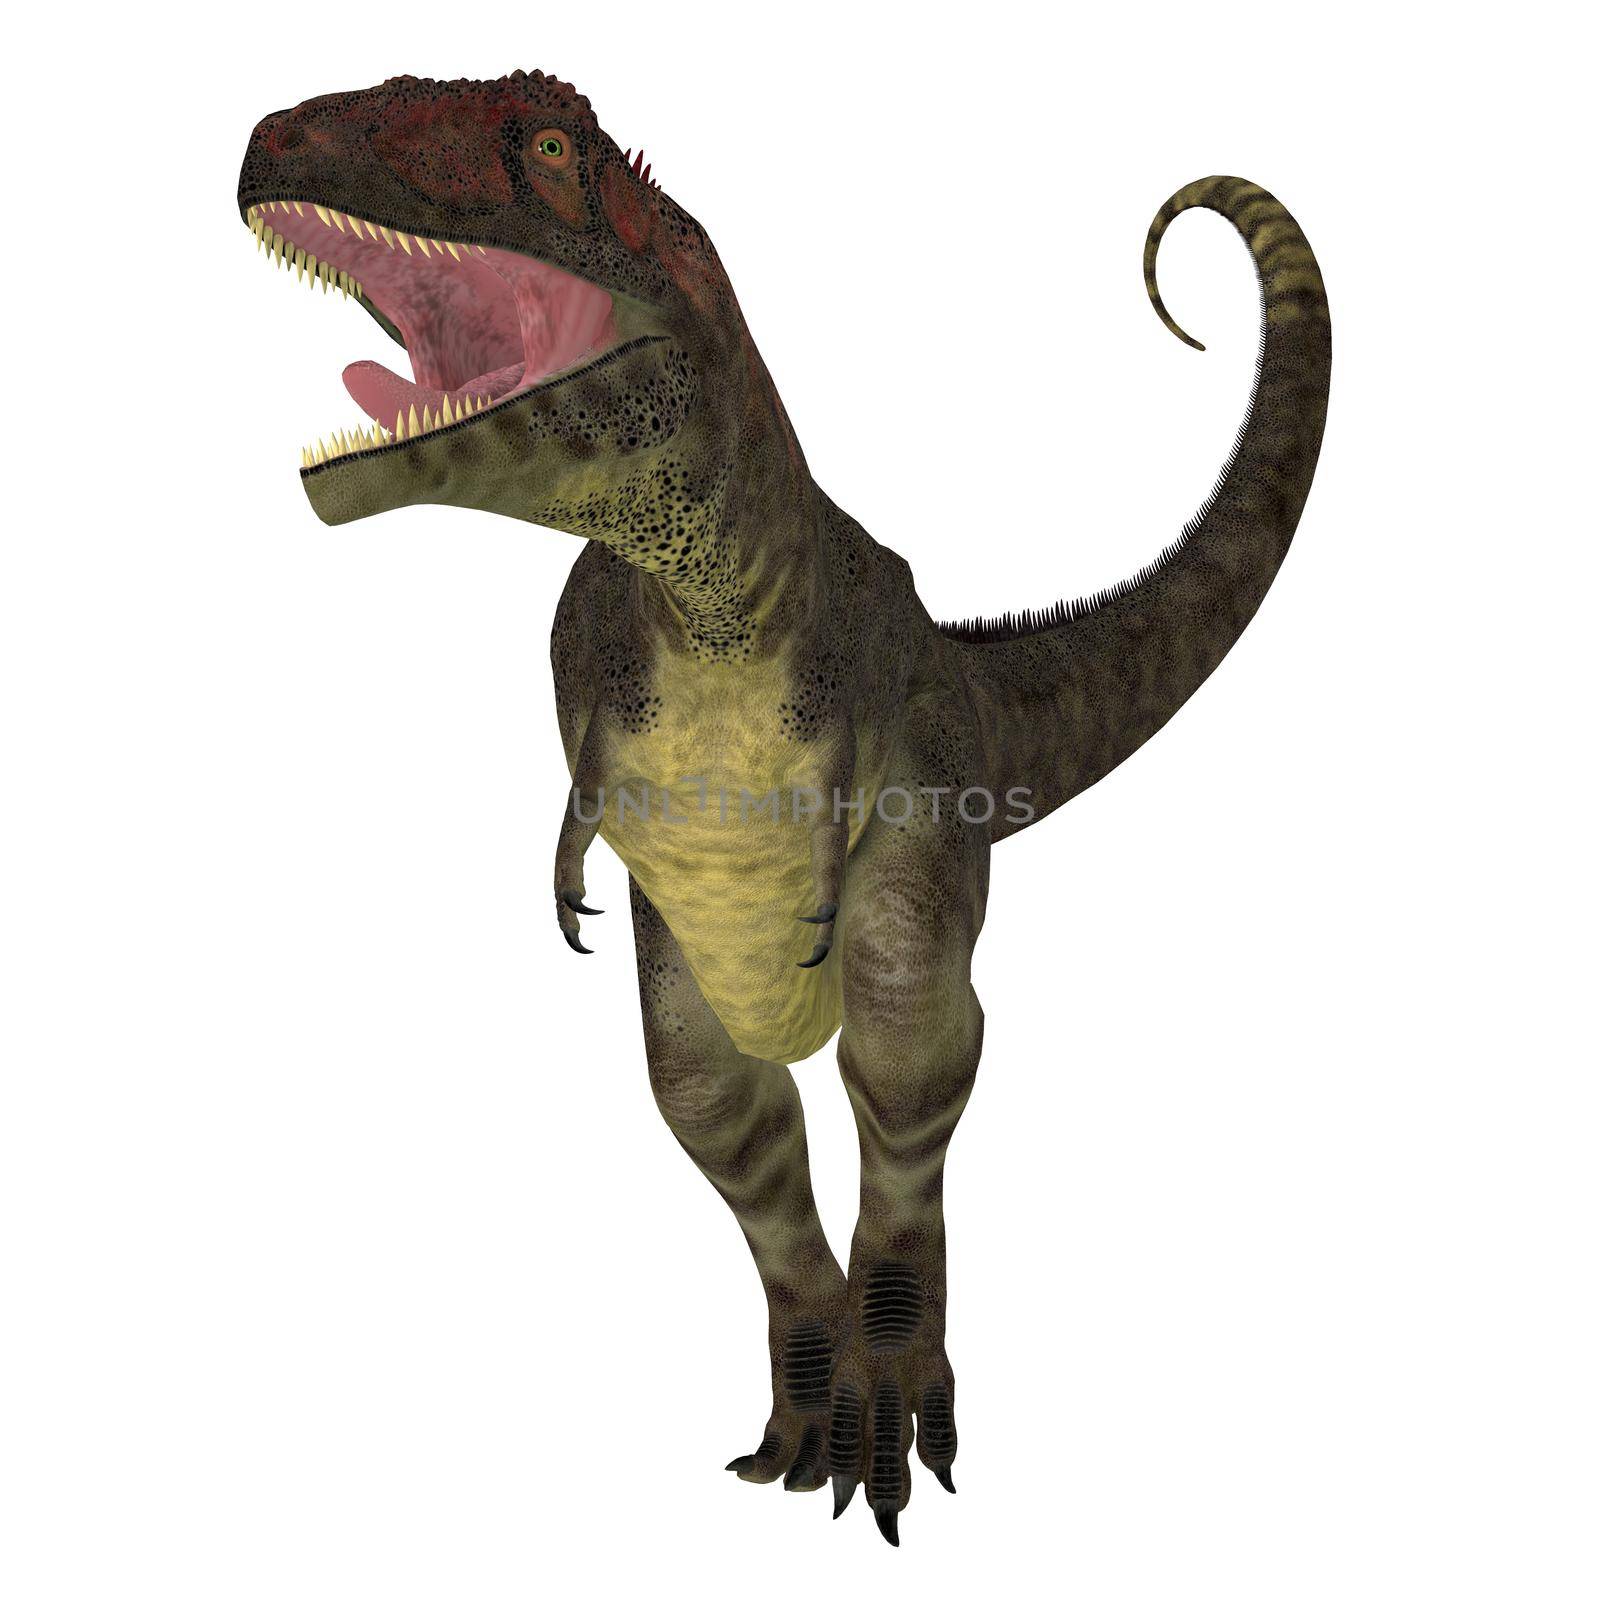 Mapusaurus was a carnivorous theropod dinosaur that lived in Argentina during the Cretaceous Period.